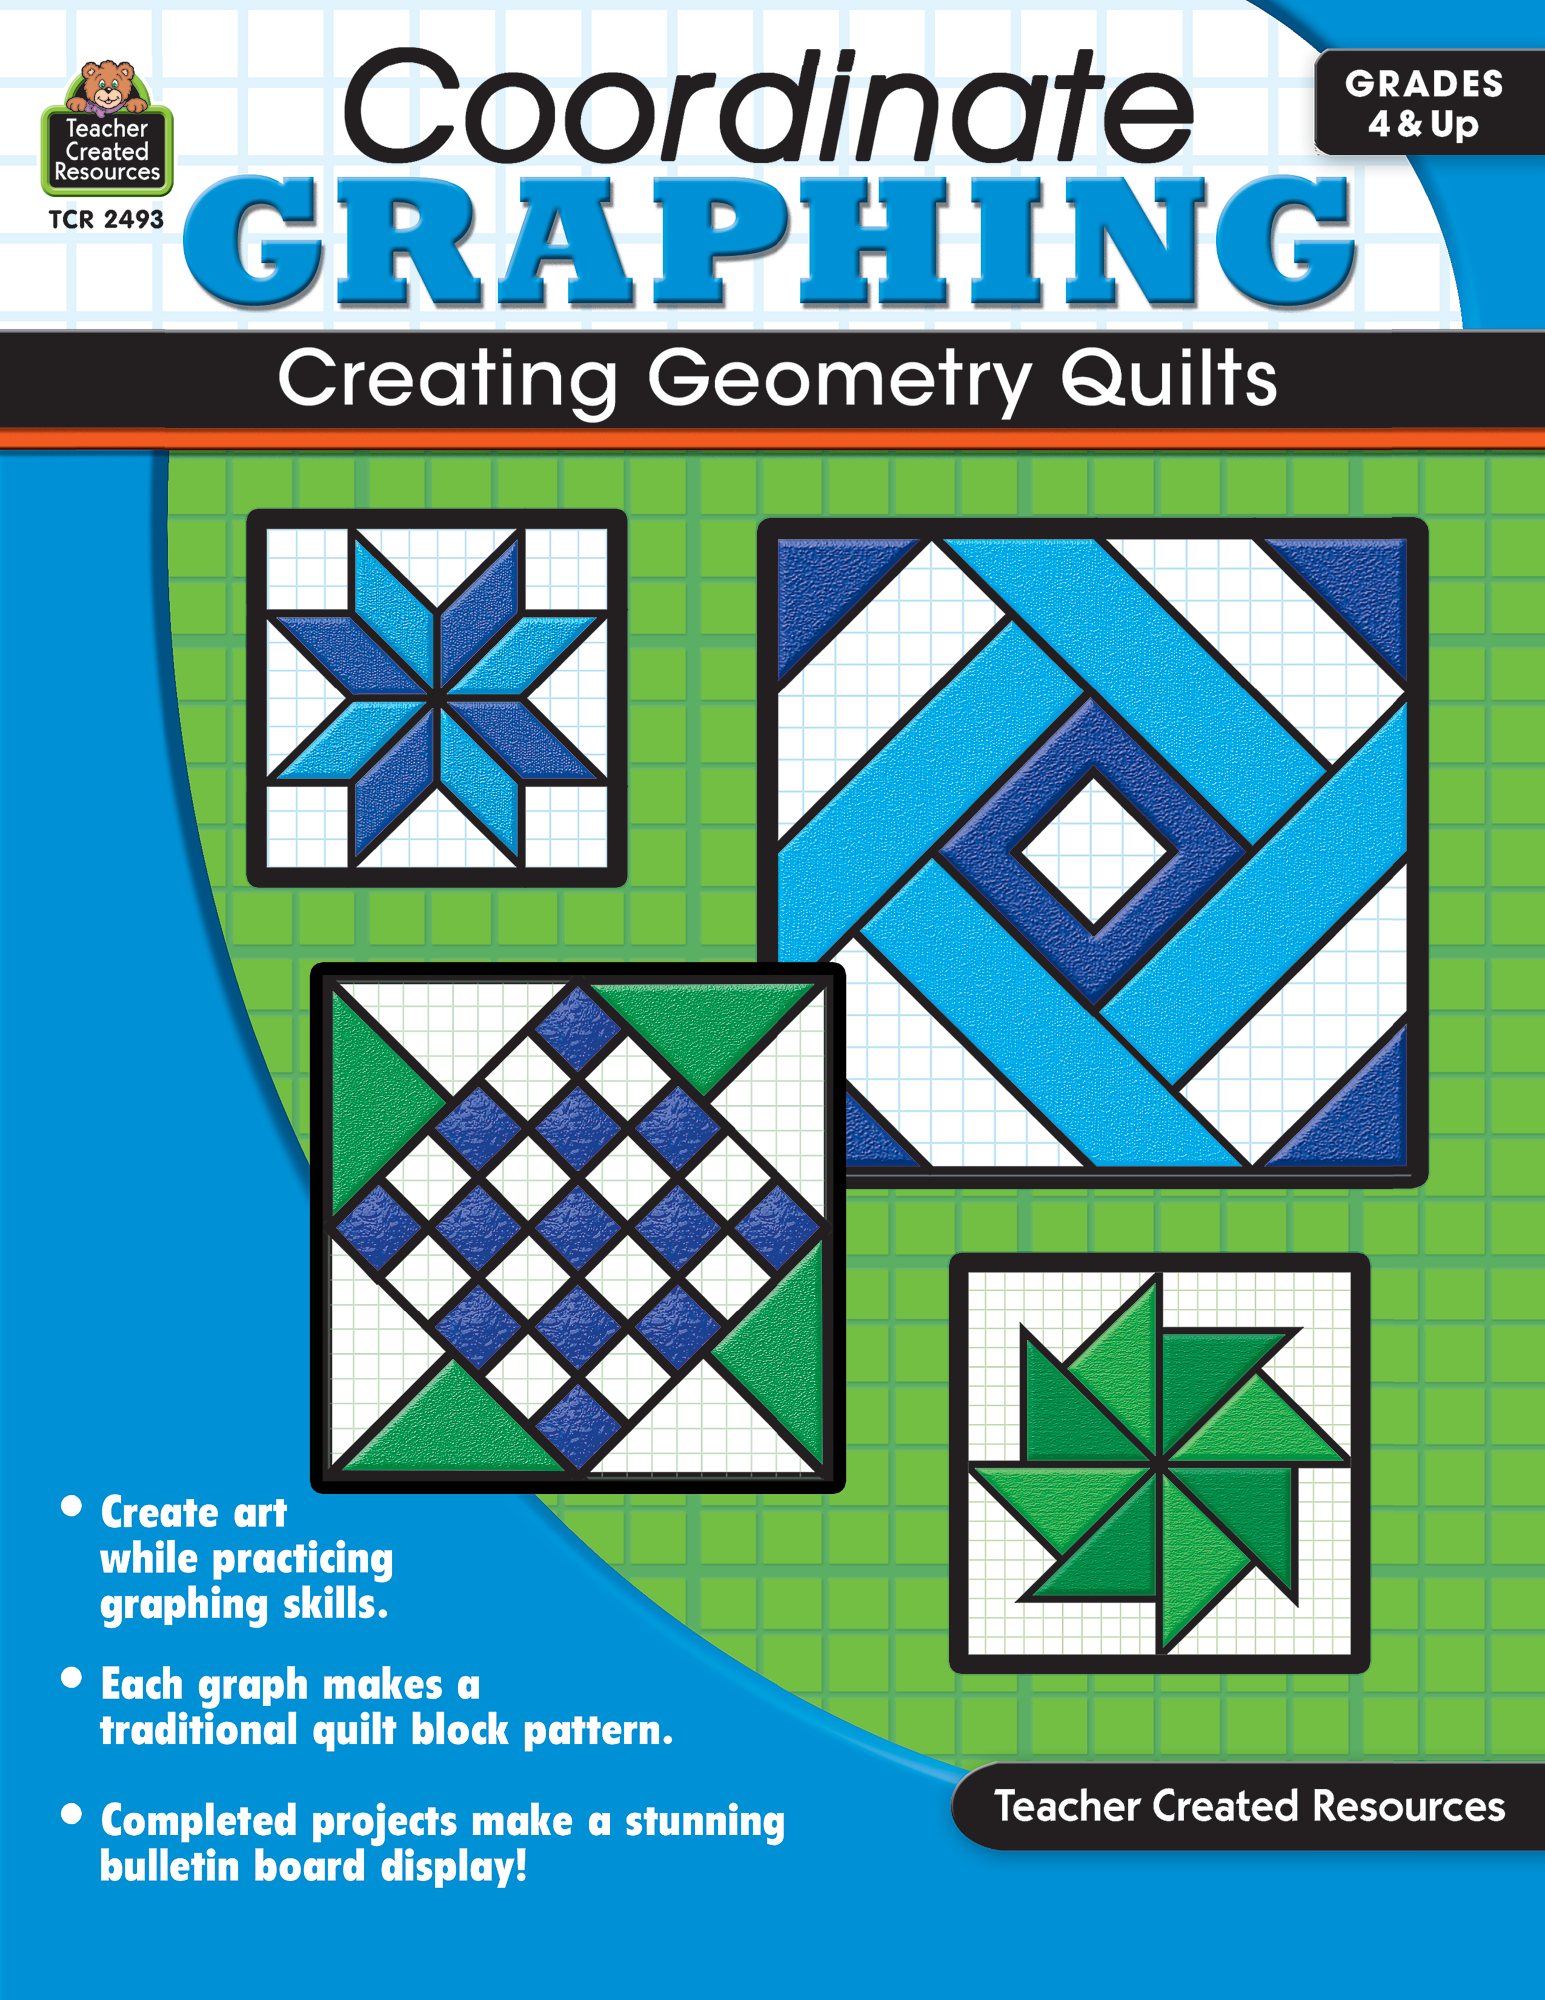 coordinate-graphing-creating-geometry-quilts-grade-4-up-tcr2493-teacher-created-resources